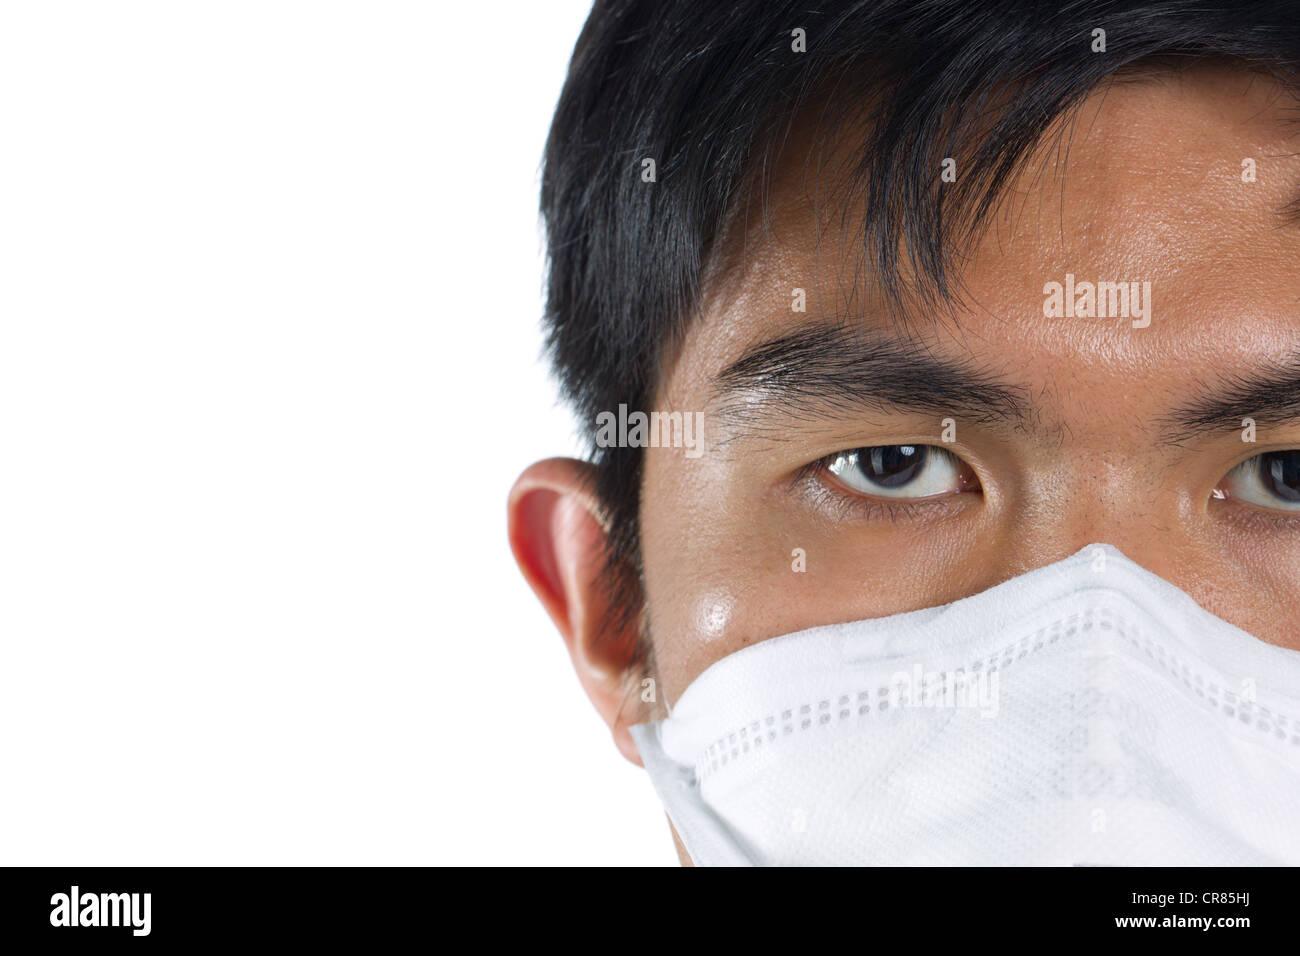 Close-up portrait of a man wearing a surgical mask Stock Photo